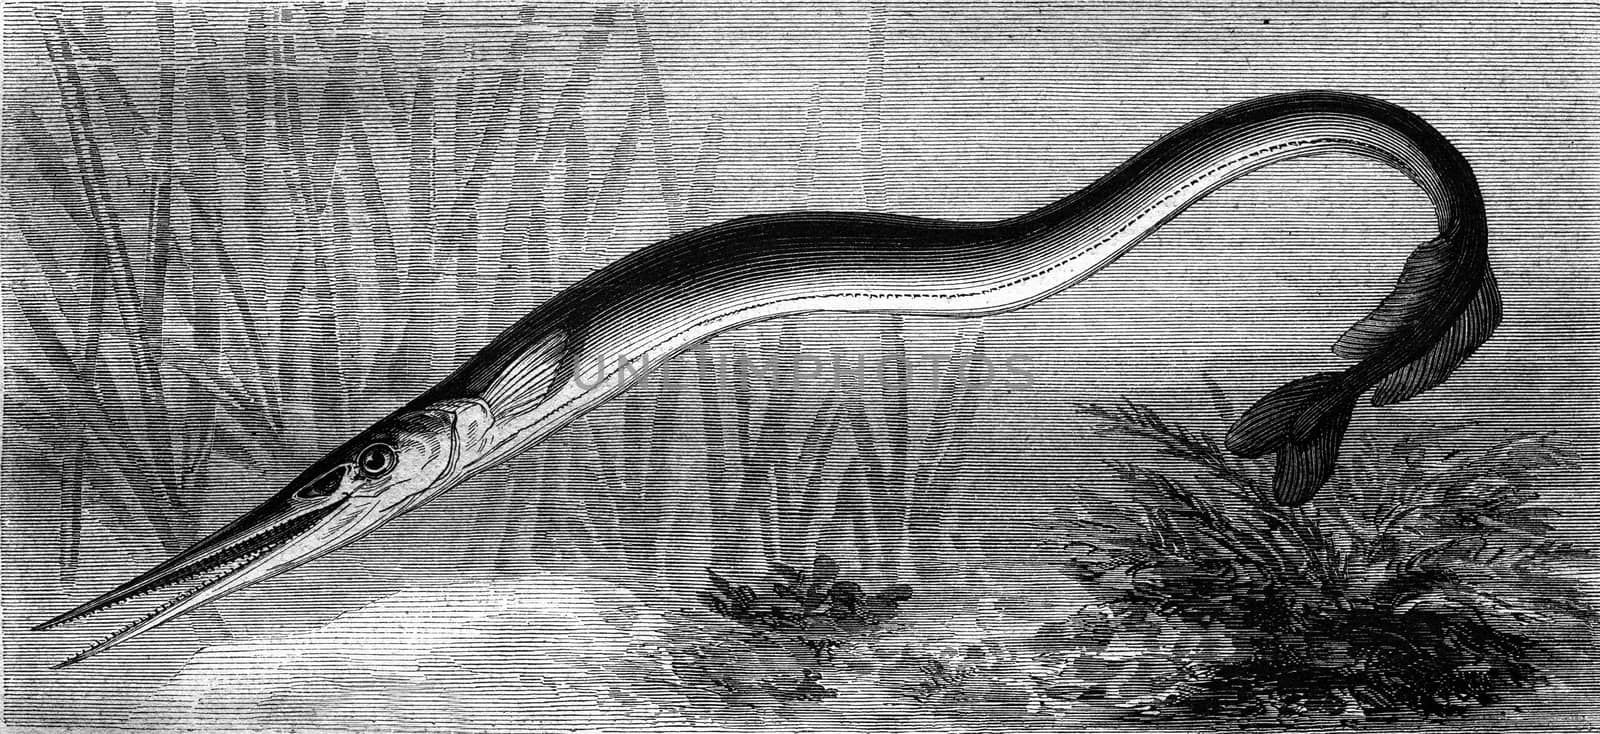 The Garfish, vintage engraved illustration. Magasin Pittoresque 1869.
